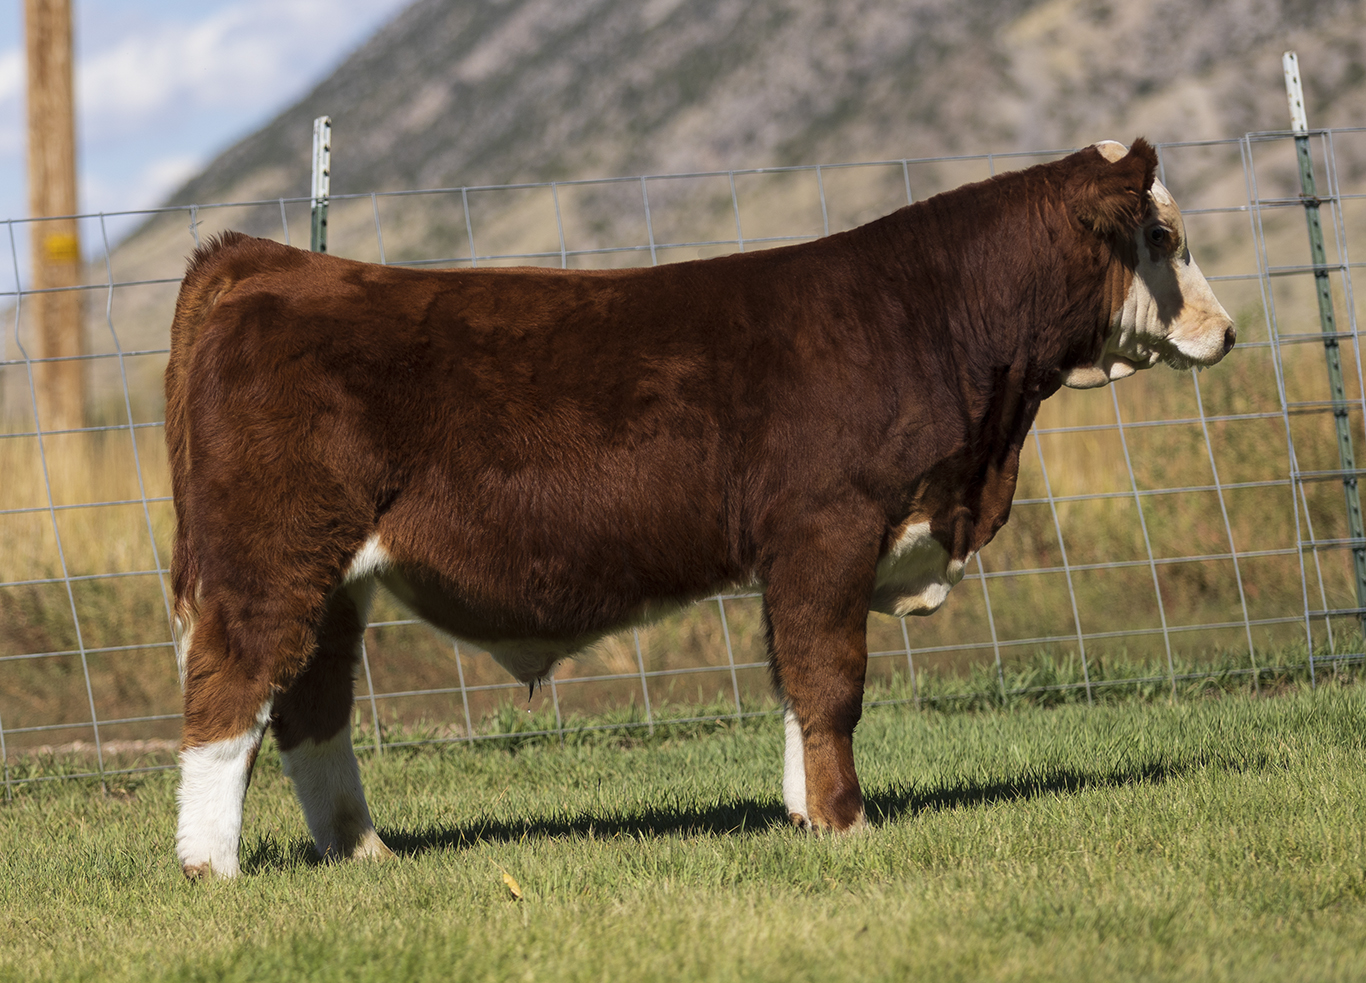 Tag 889 Bet on Red x Voltage Bull